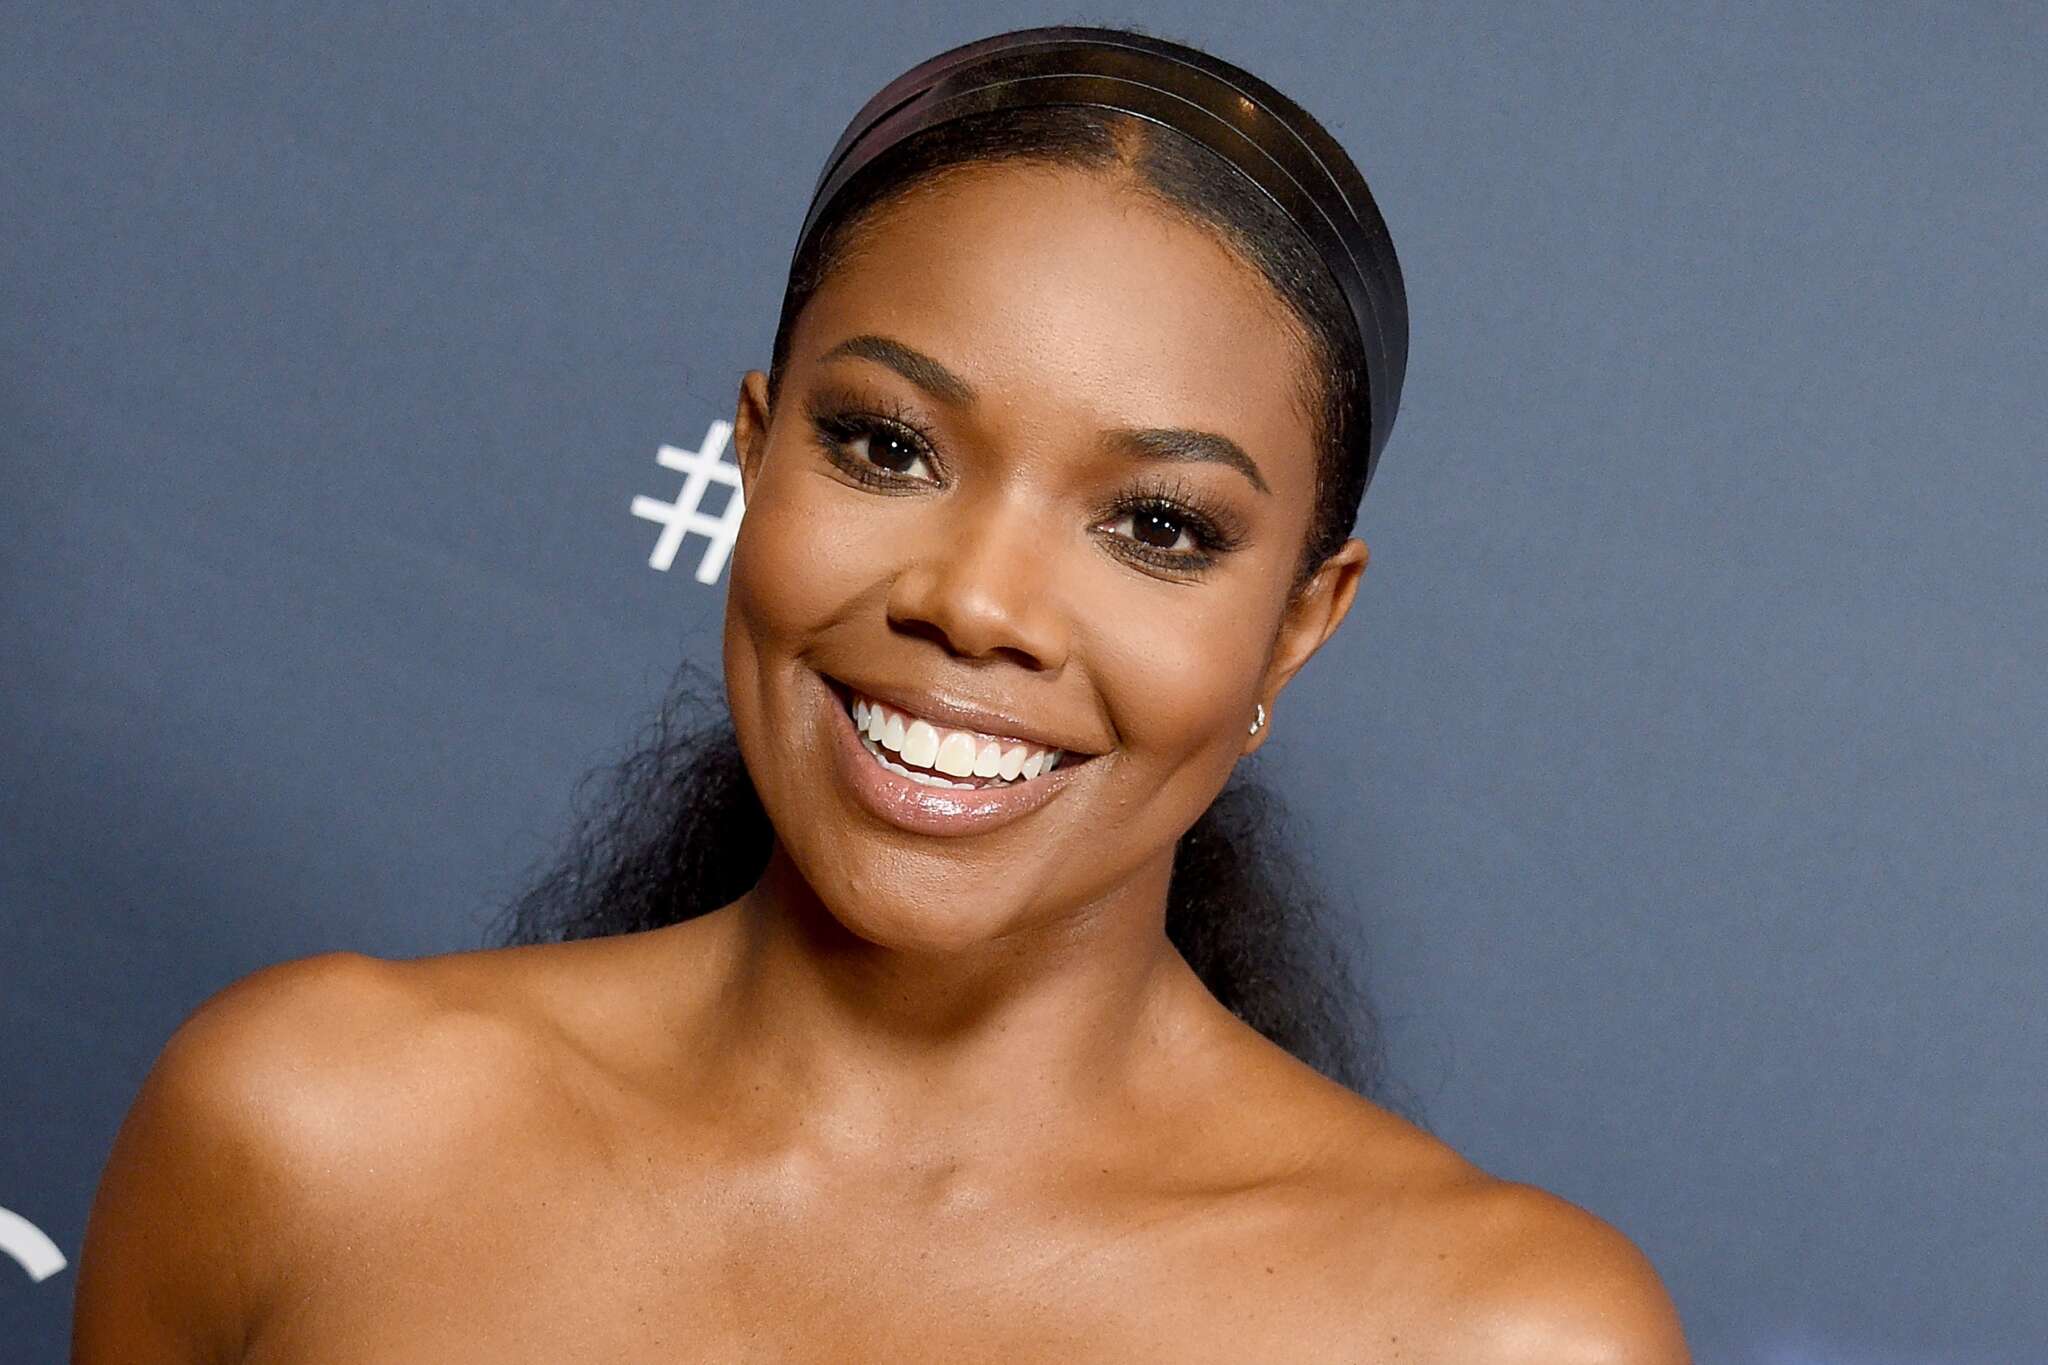 Gabrielle Union Lends Her Voice To An Important Author Who Represents Black Lives In Her Stories - See Her Message